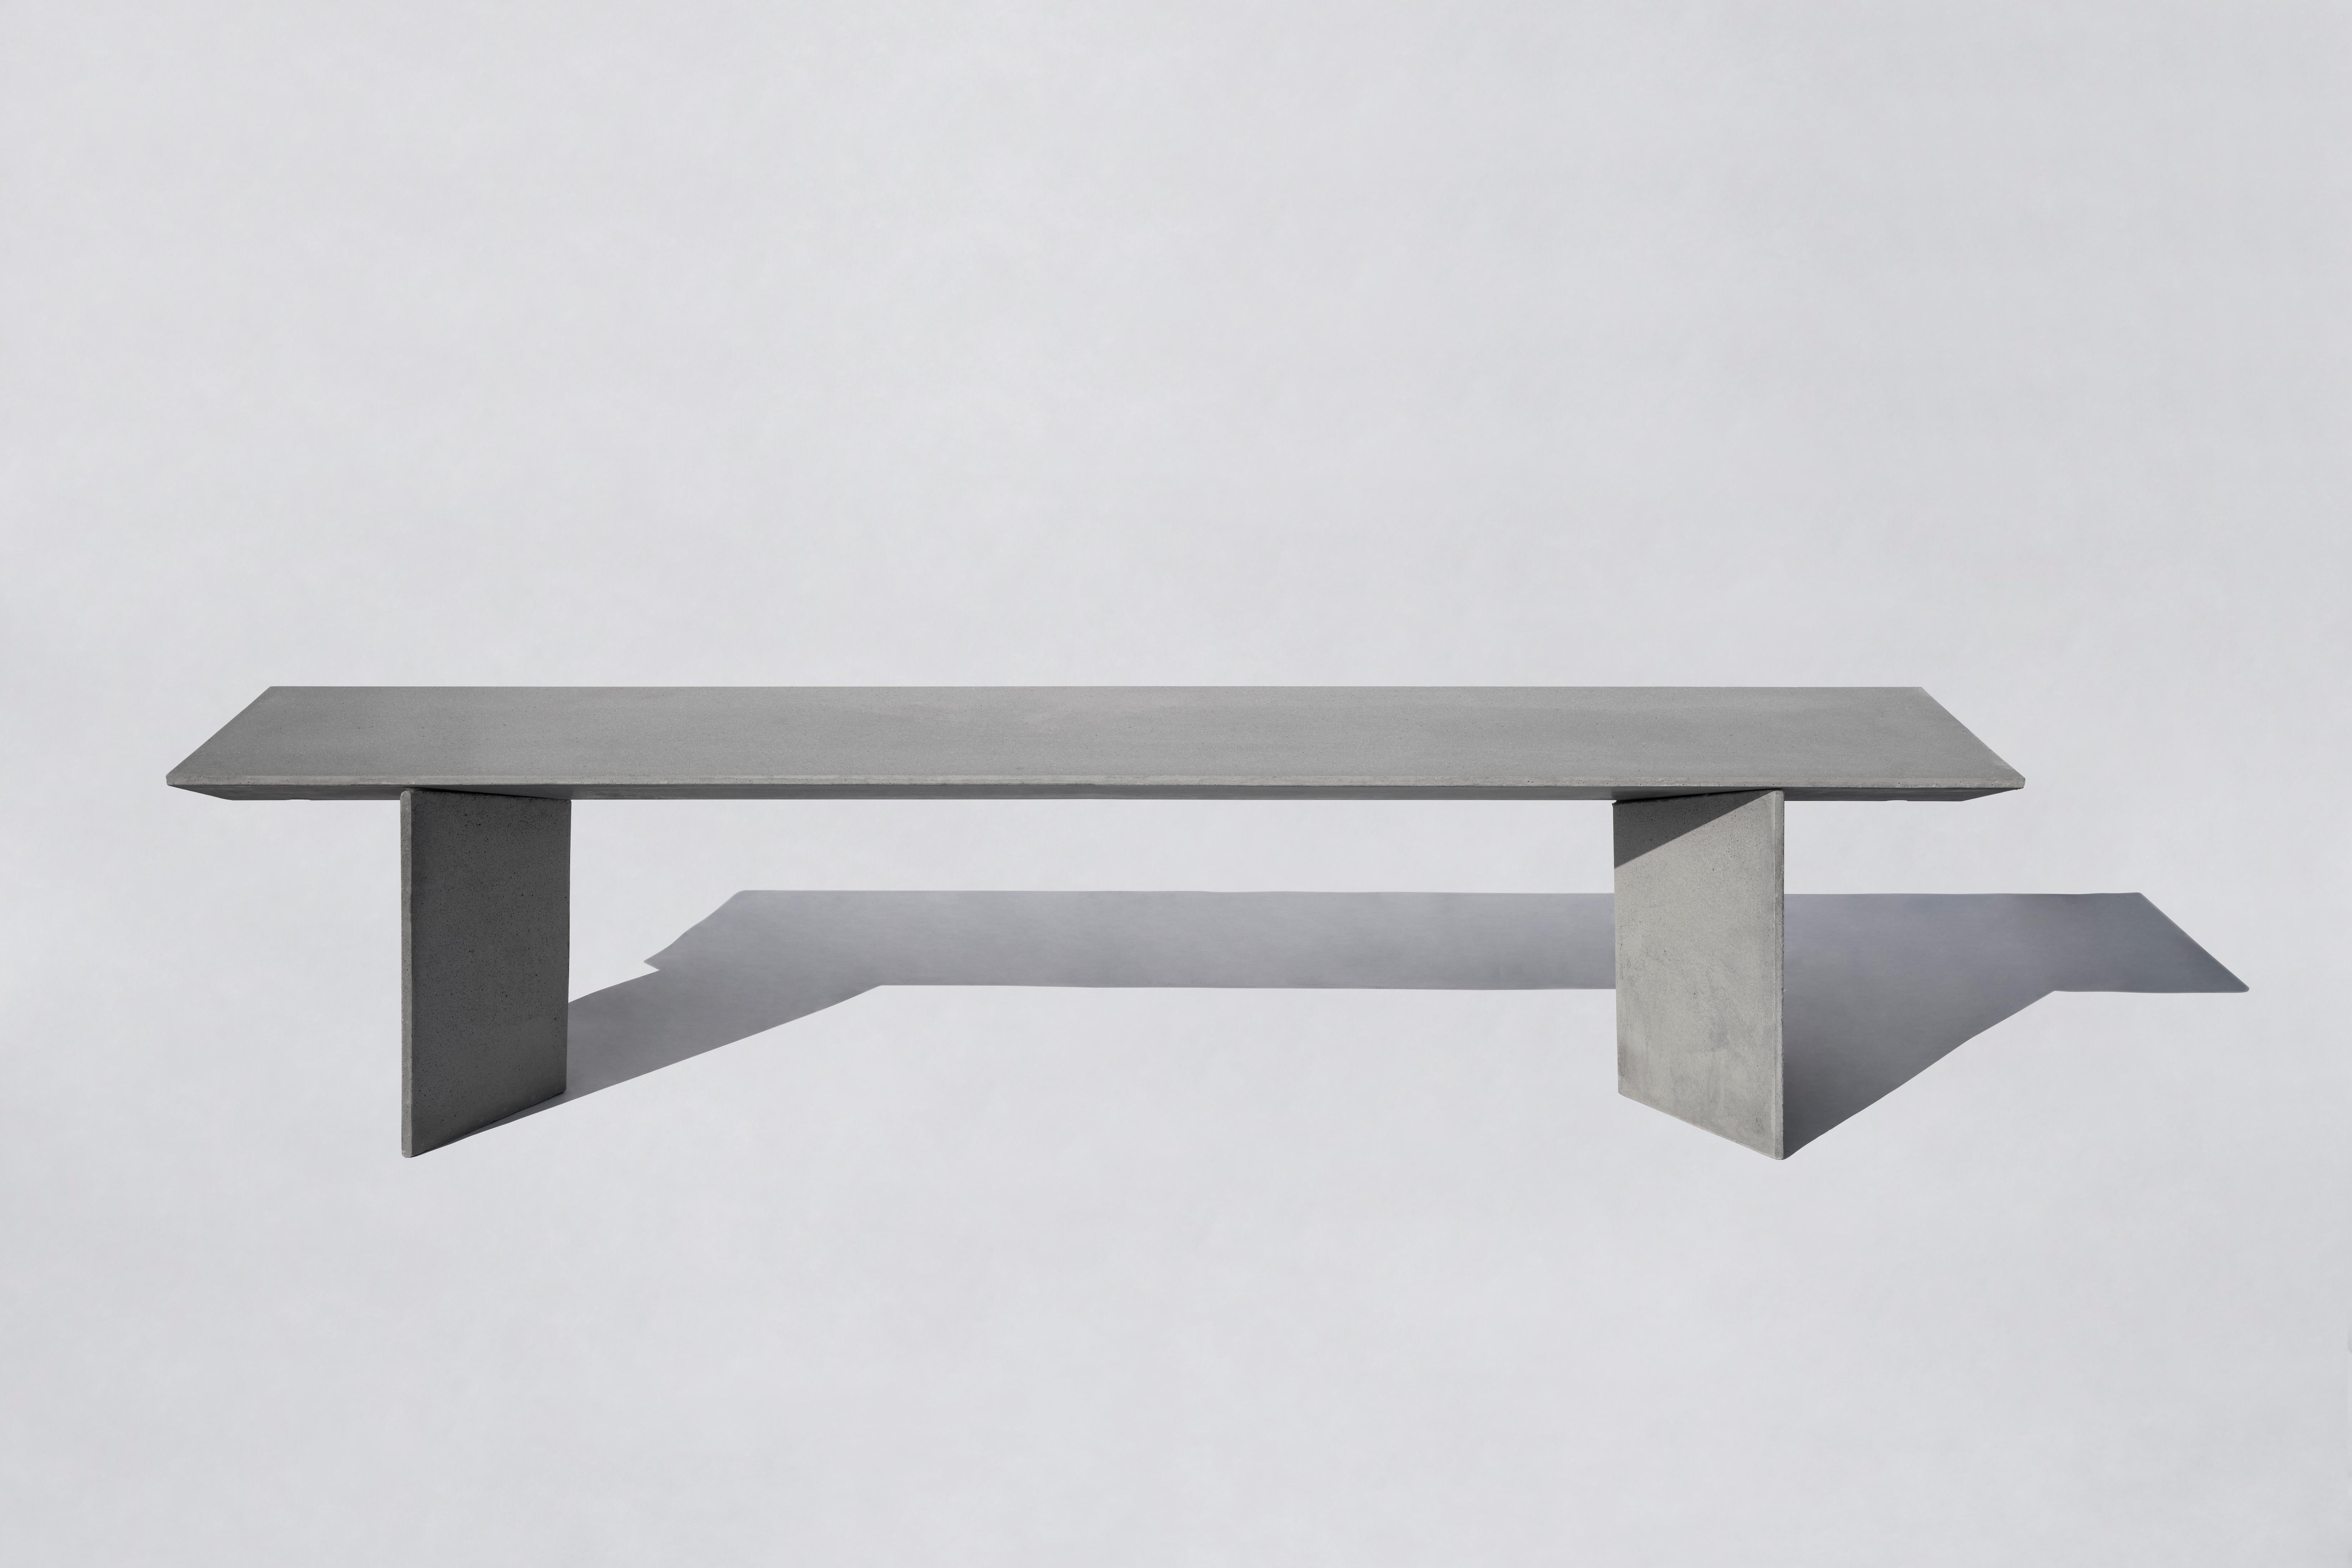 LIANG 1 Bench by Bentu Design

Concrete
Measures: 2000×400×445 mm 
140 kg
Outdoor use: OK

--
Bentu Desing is a Guangzhou-based experimental design studio that explores concepts of product, space and environment through the invention of new